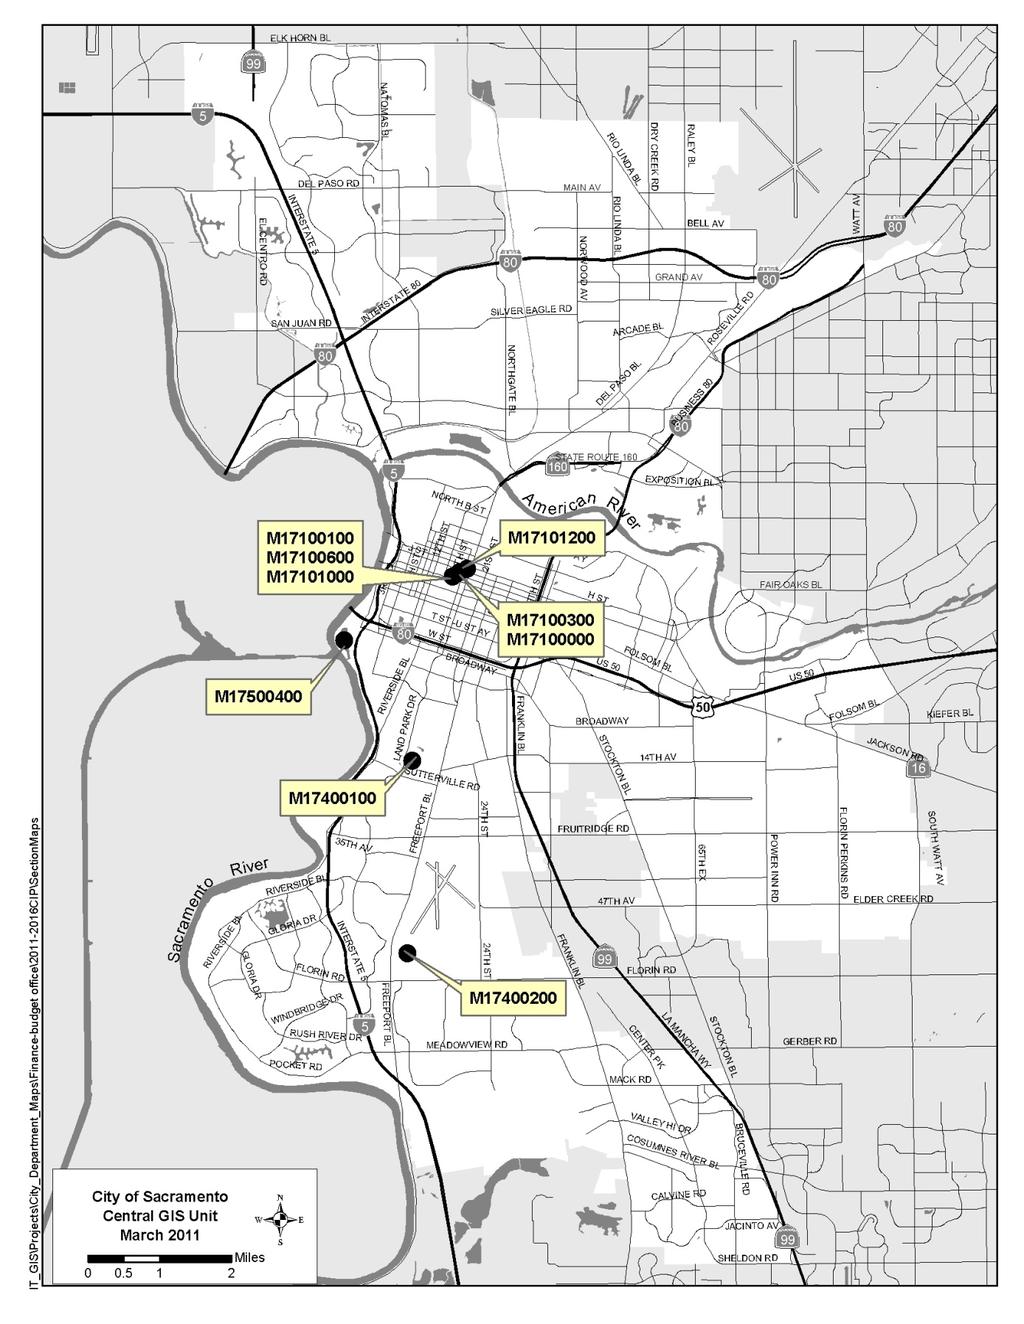 CITY OF SACRAMENTO CONVENTION, CULTURE AND LEISURE PROGRAM OVERVIEW FY2/2 Capital Projects Non-site specific or multi-site projects are not shown Note: